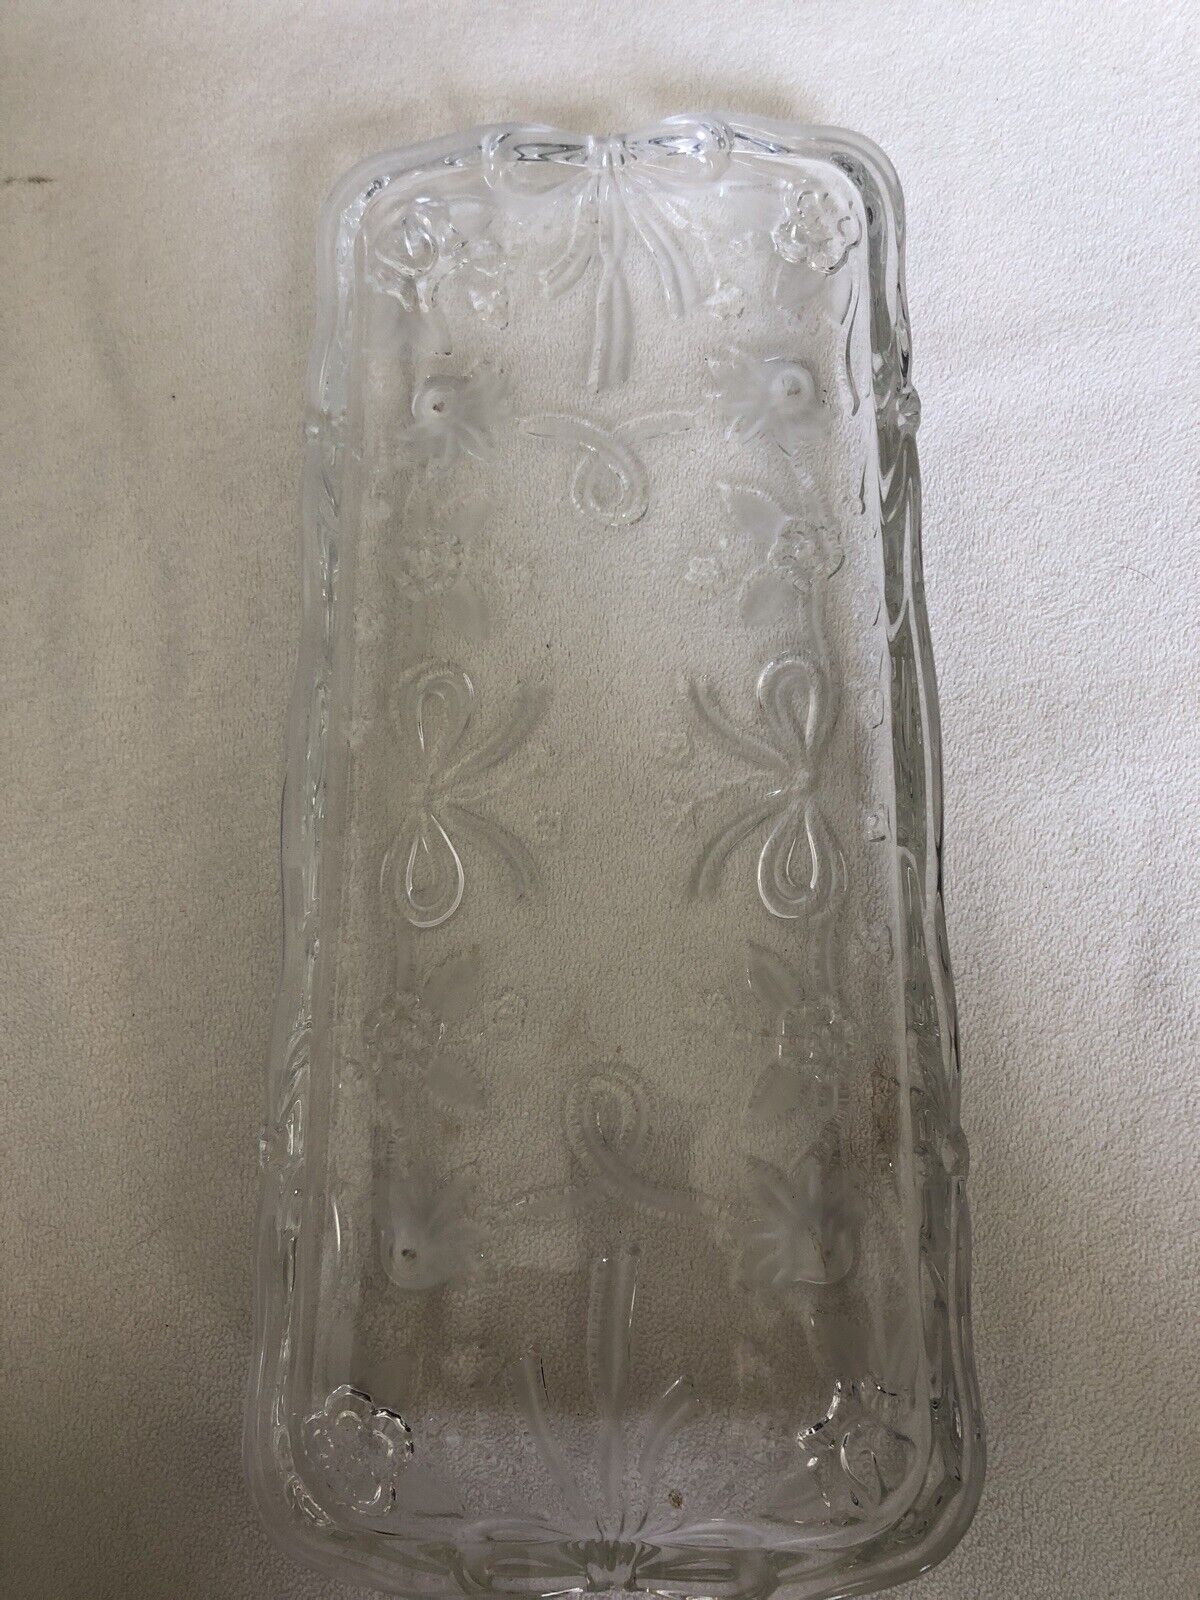 Vintage Clear Glass Serving Tray Bow And Floral Design 5x13”